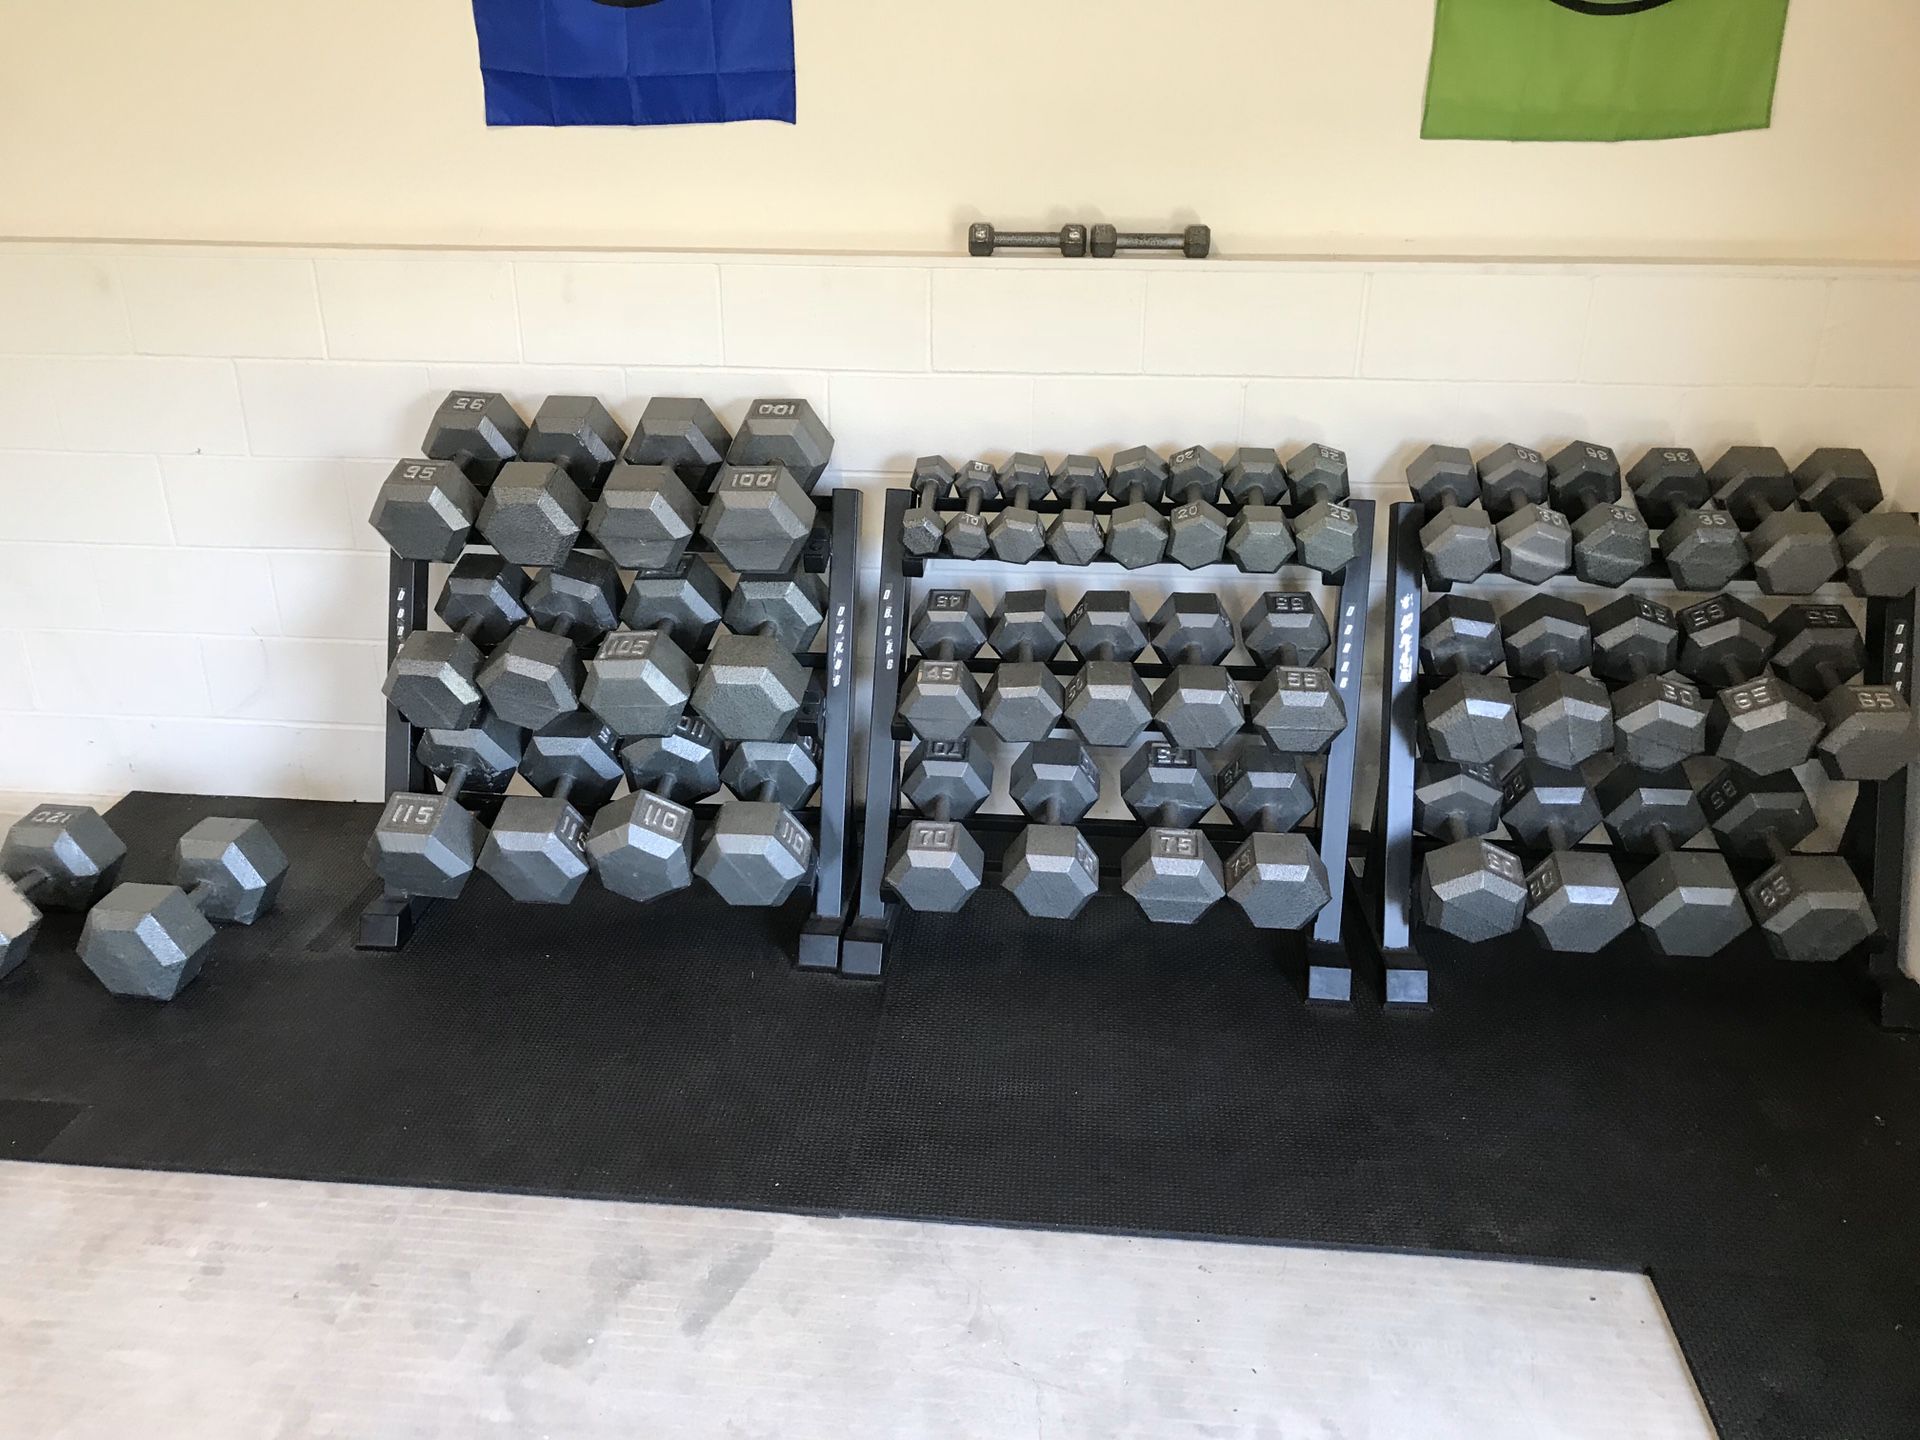 Entire dumbbell set with racks